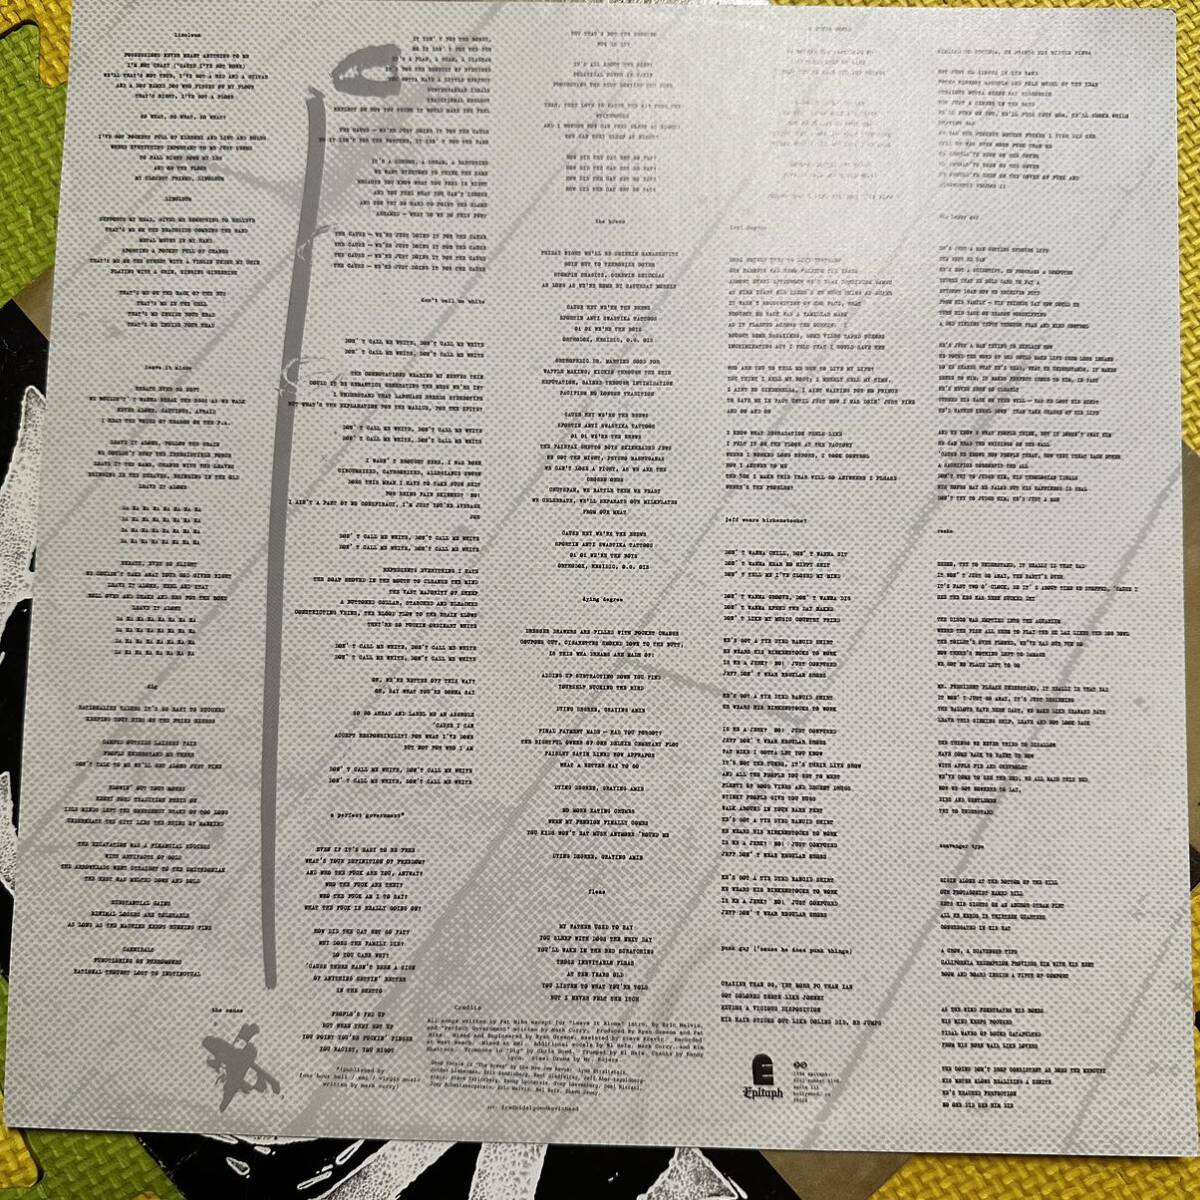 US record NOFX / Punk In drublic LP 12 -inch record Epitaph